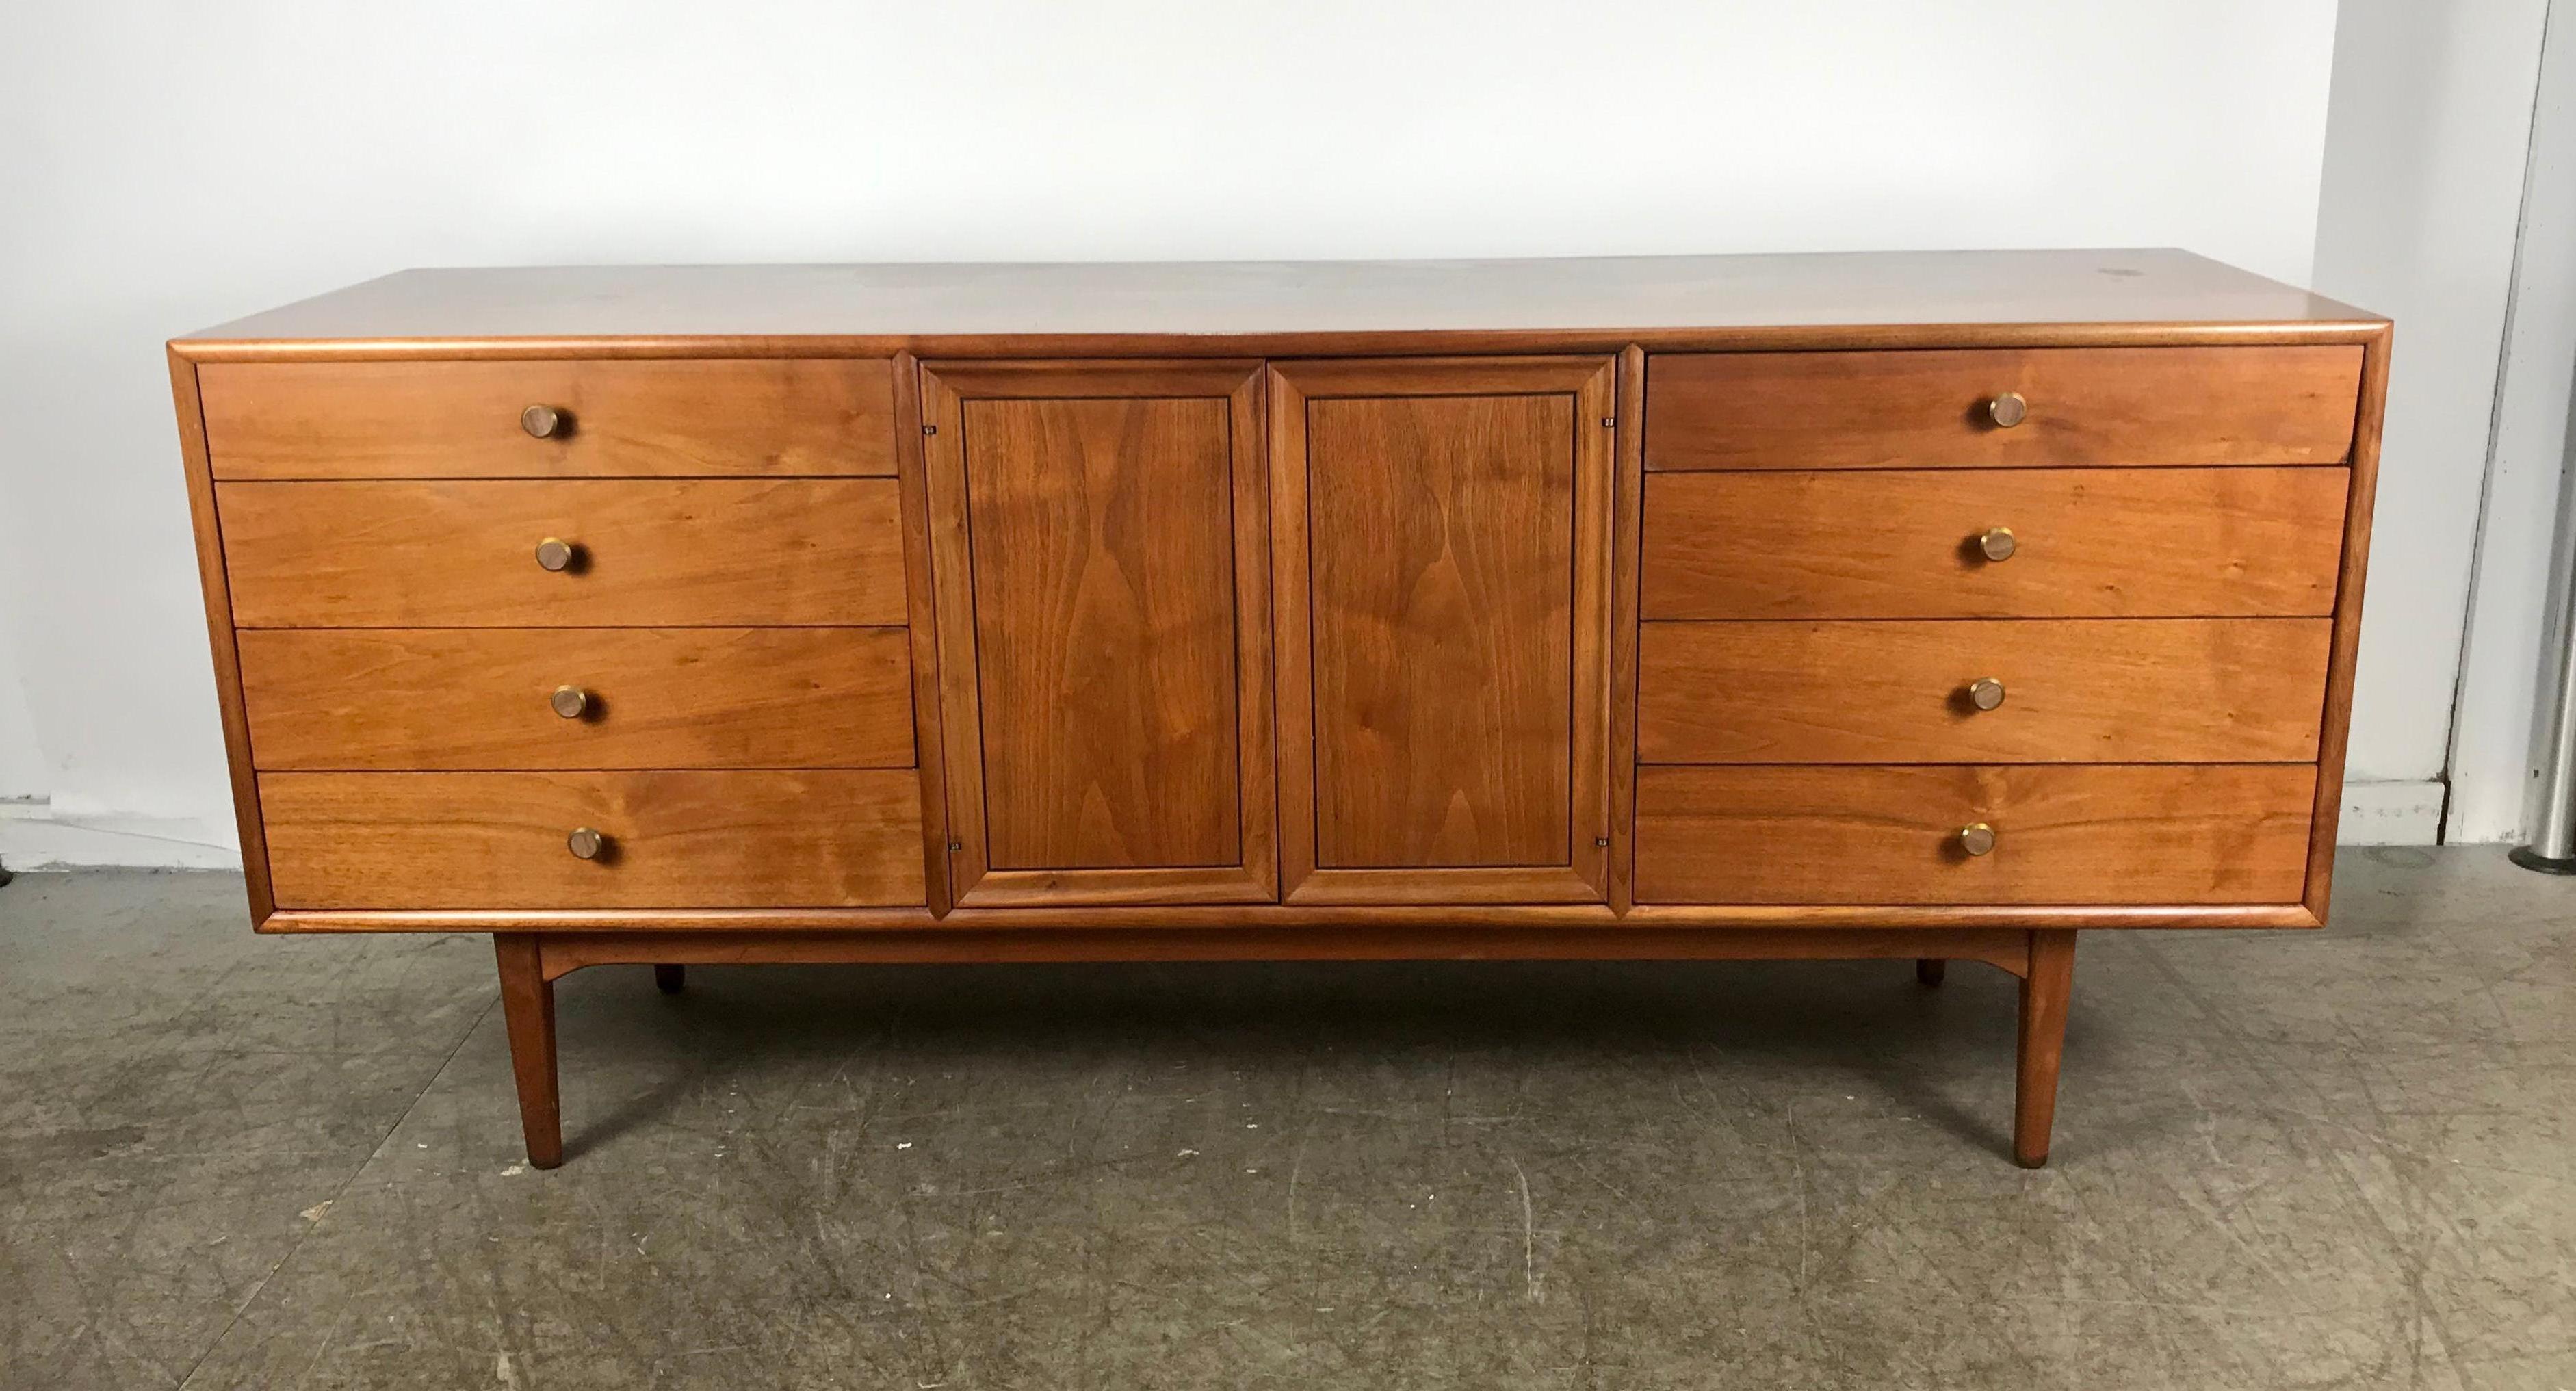 Modernist 11-drawer dresser by Kipp Stewart for Drexel, Classic Mid-Century Modern design, superior quality and construction, featuring 11 dove tail jointed drawers, brass hand pulls with inlay wood centers, hand delivery to New York City or